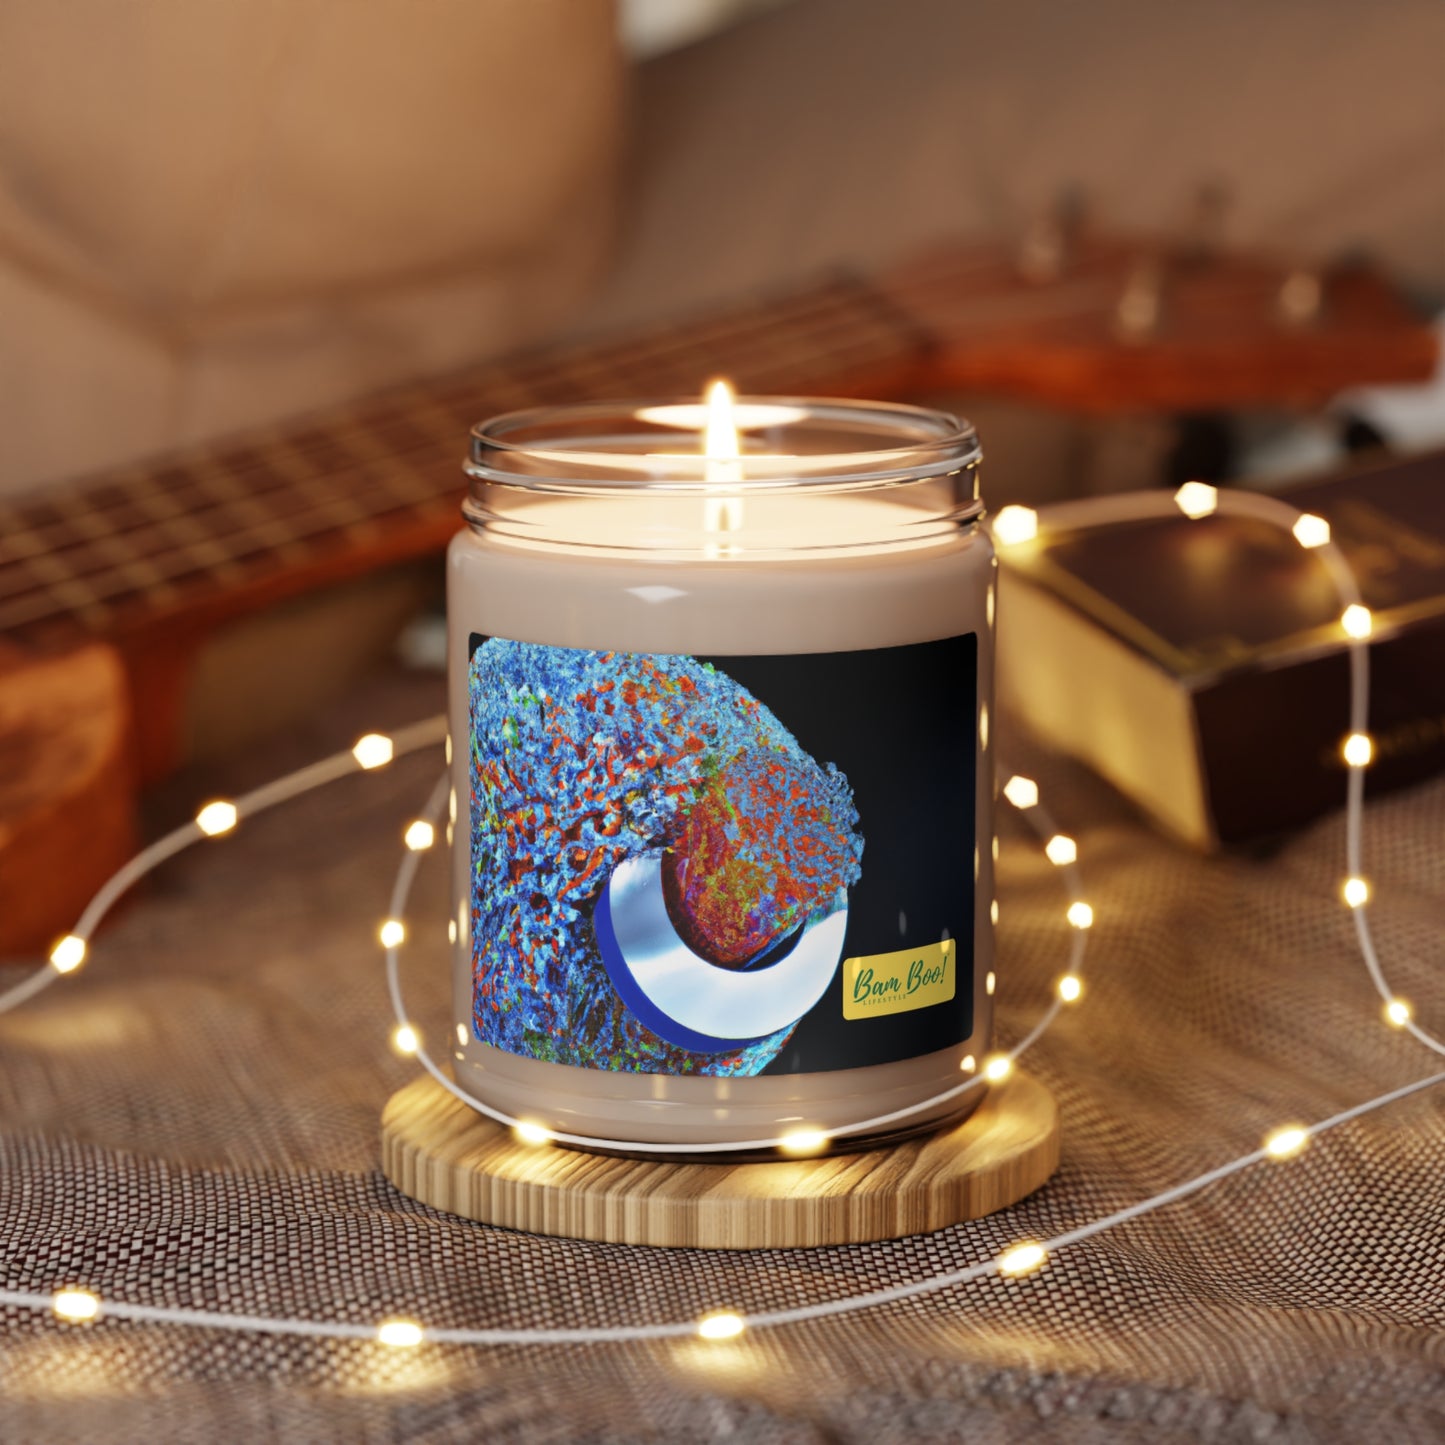 "Tech Art Fusion: The Intersection of Old and New" - Bam Boo! Lifestyle Eco-friendly Soy Candle